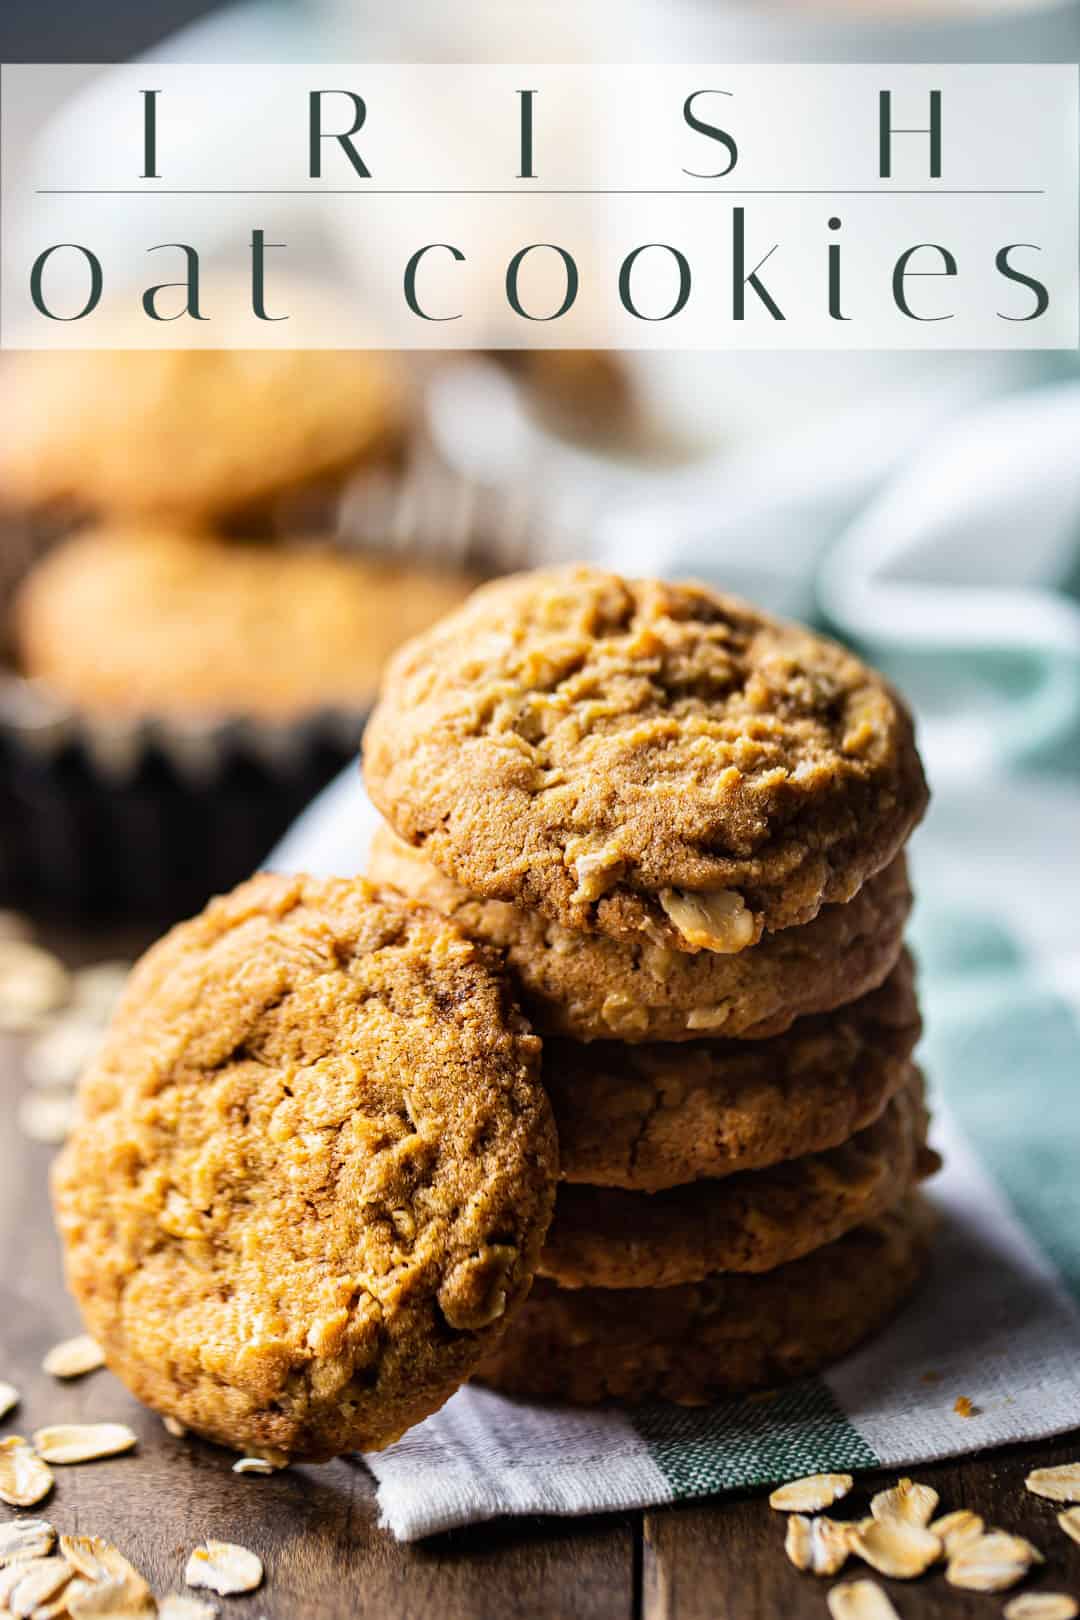 Irish oatmeal cookie recipe, prepared and stacked, with a text overlay above that reads "Irish Oat Cookies."